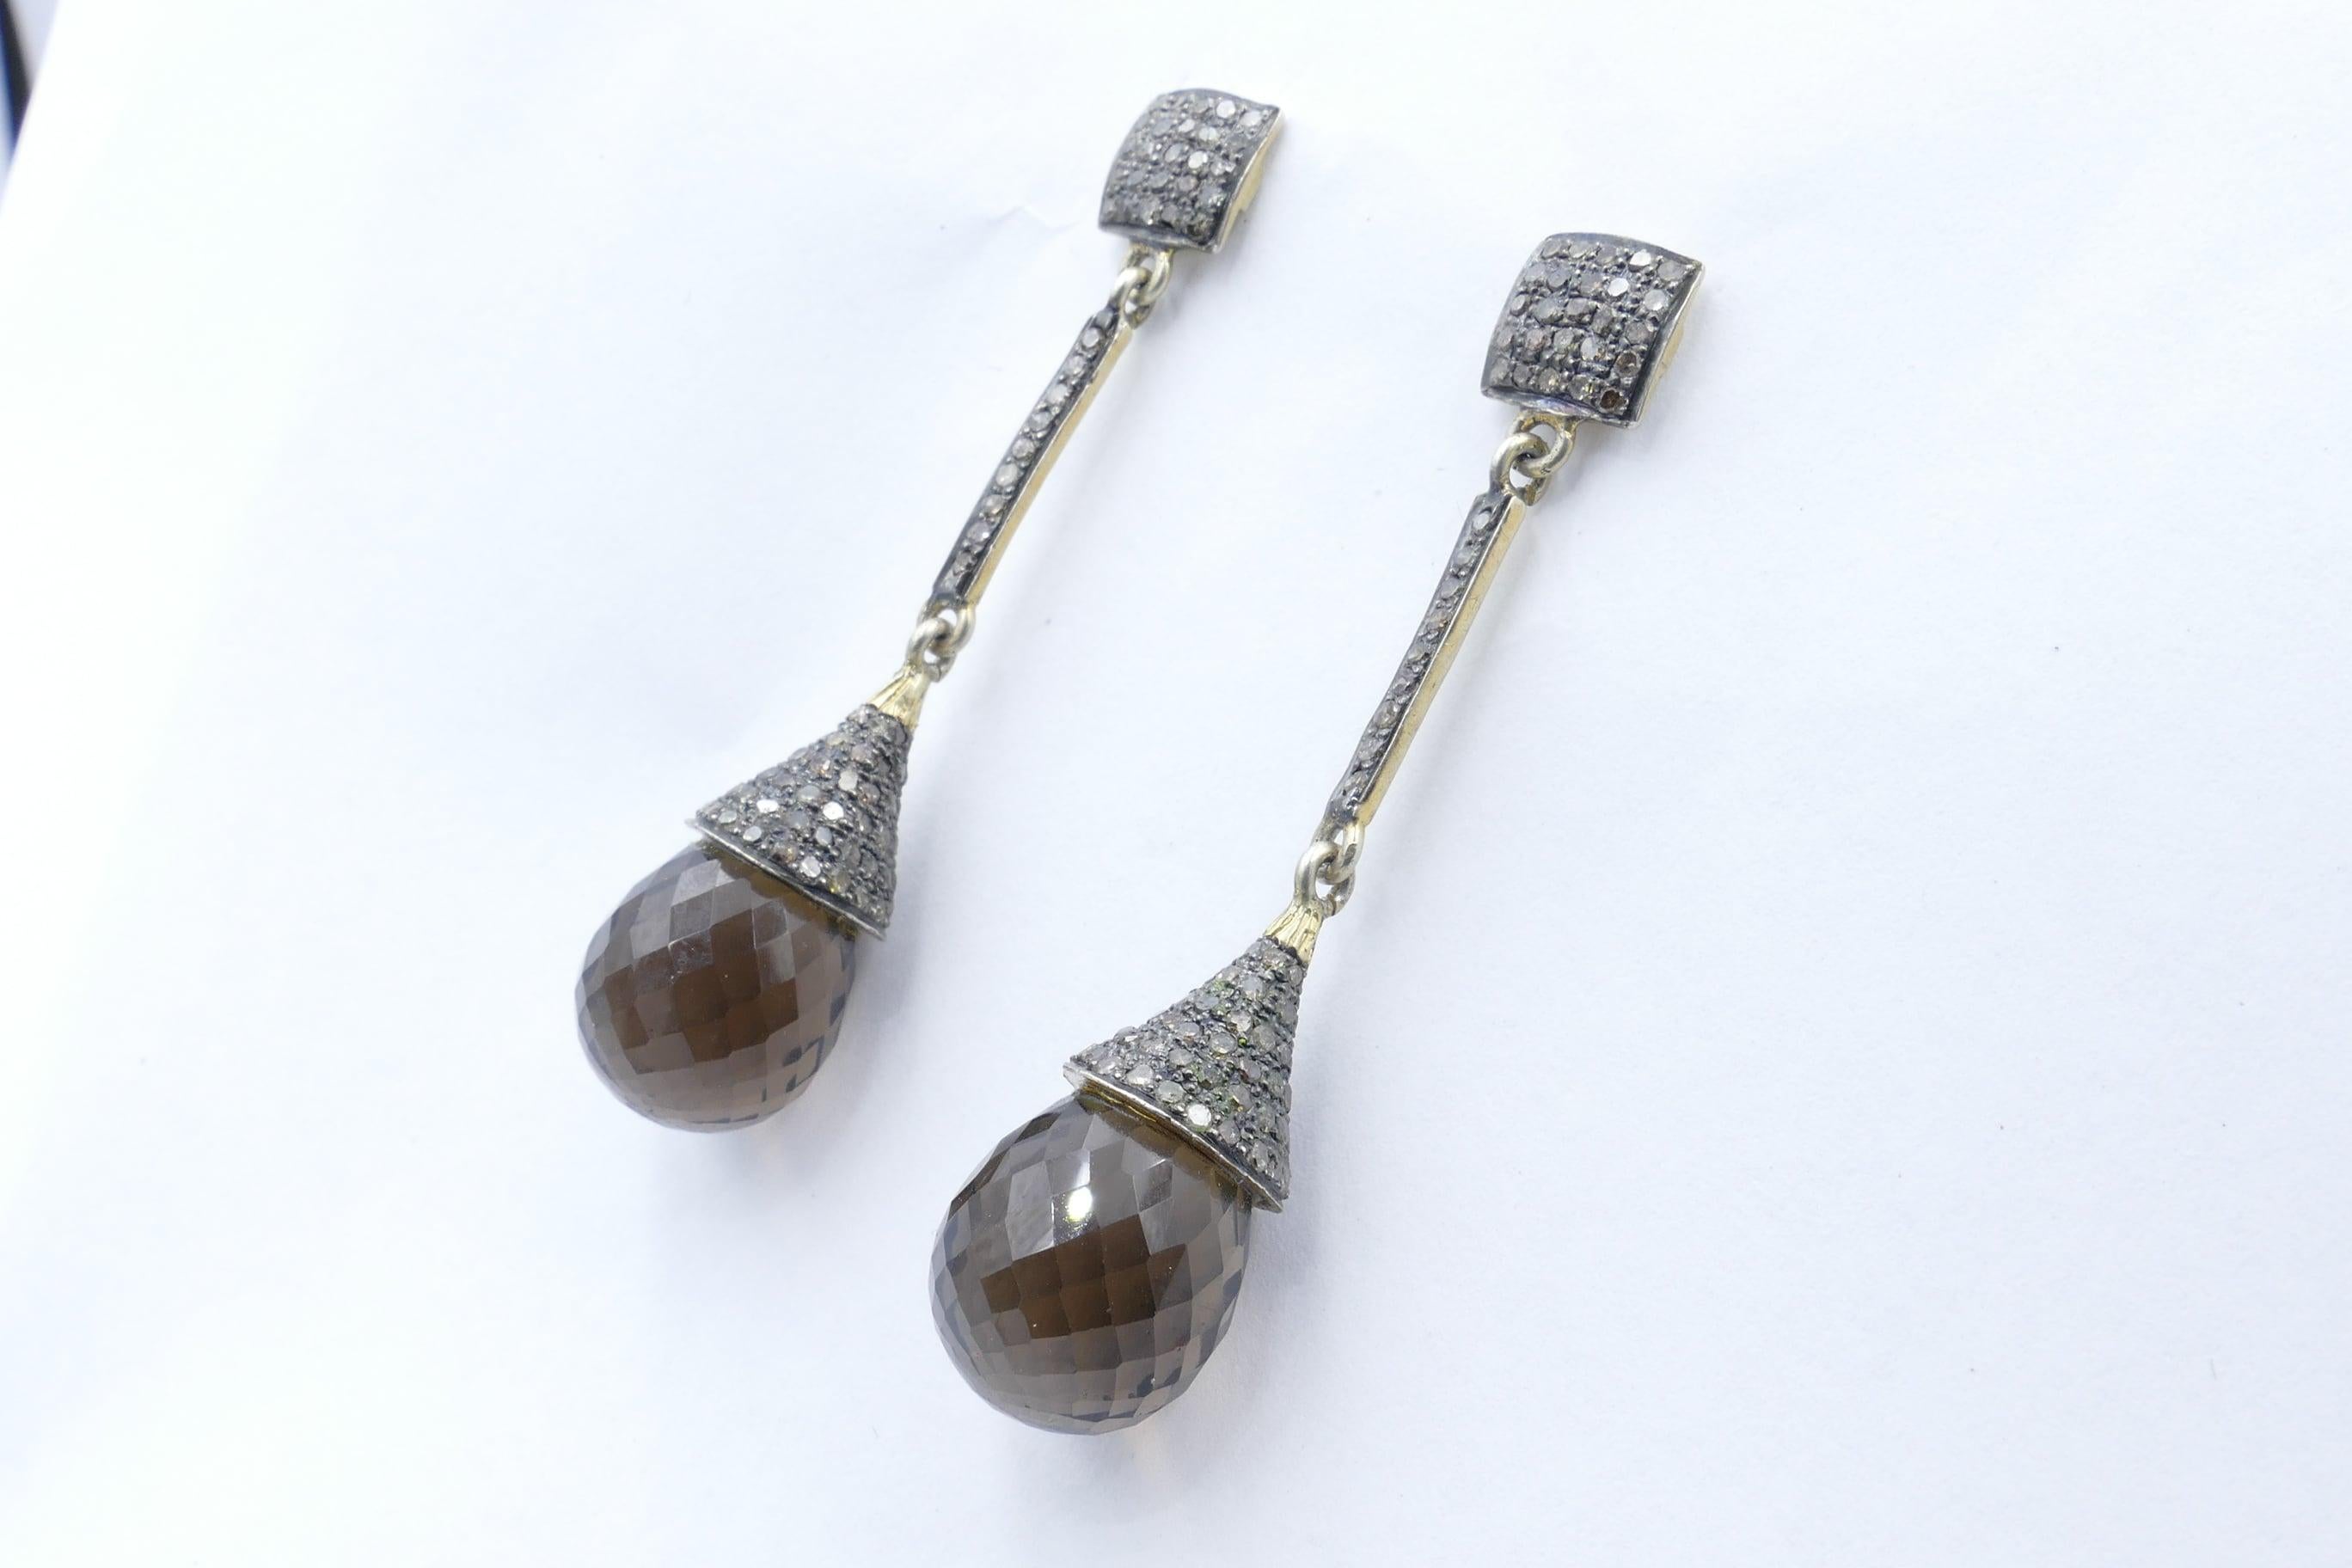 These very striking Earrings have 2 Briolette Cut Smoky Quartz set as the lower drop with 216 single cut Diamonds on the cap, stem & stud. They are quite long at 6.3mm but very effective.
Total Smoky Quartz weight 43.80 carats
Total Diamond weight